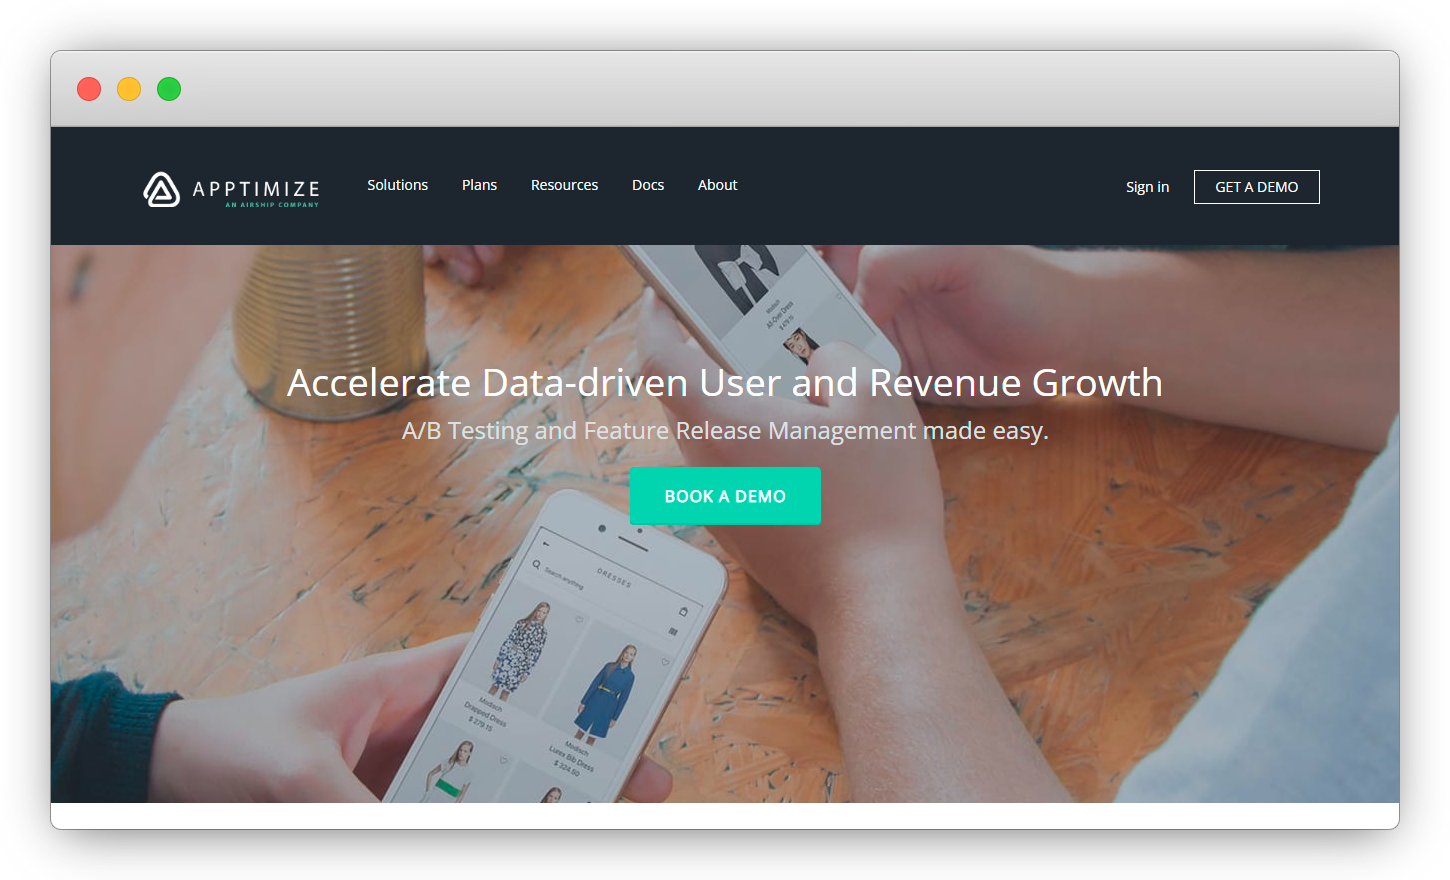 Apptimize, a Feature Flagging software and Product Management tool